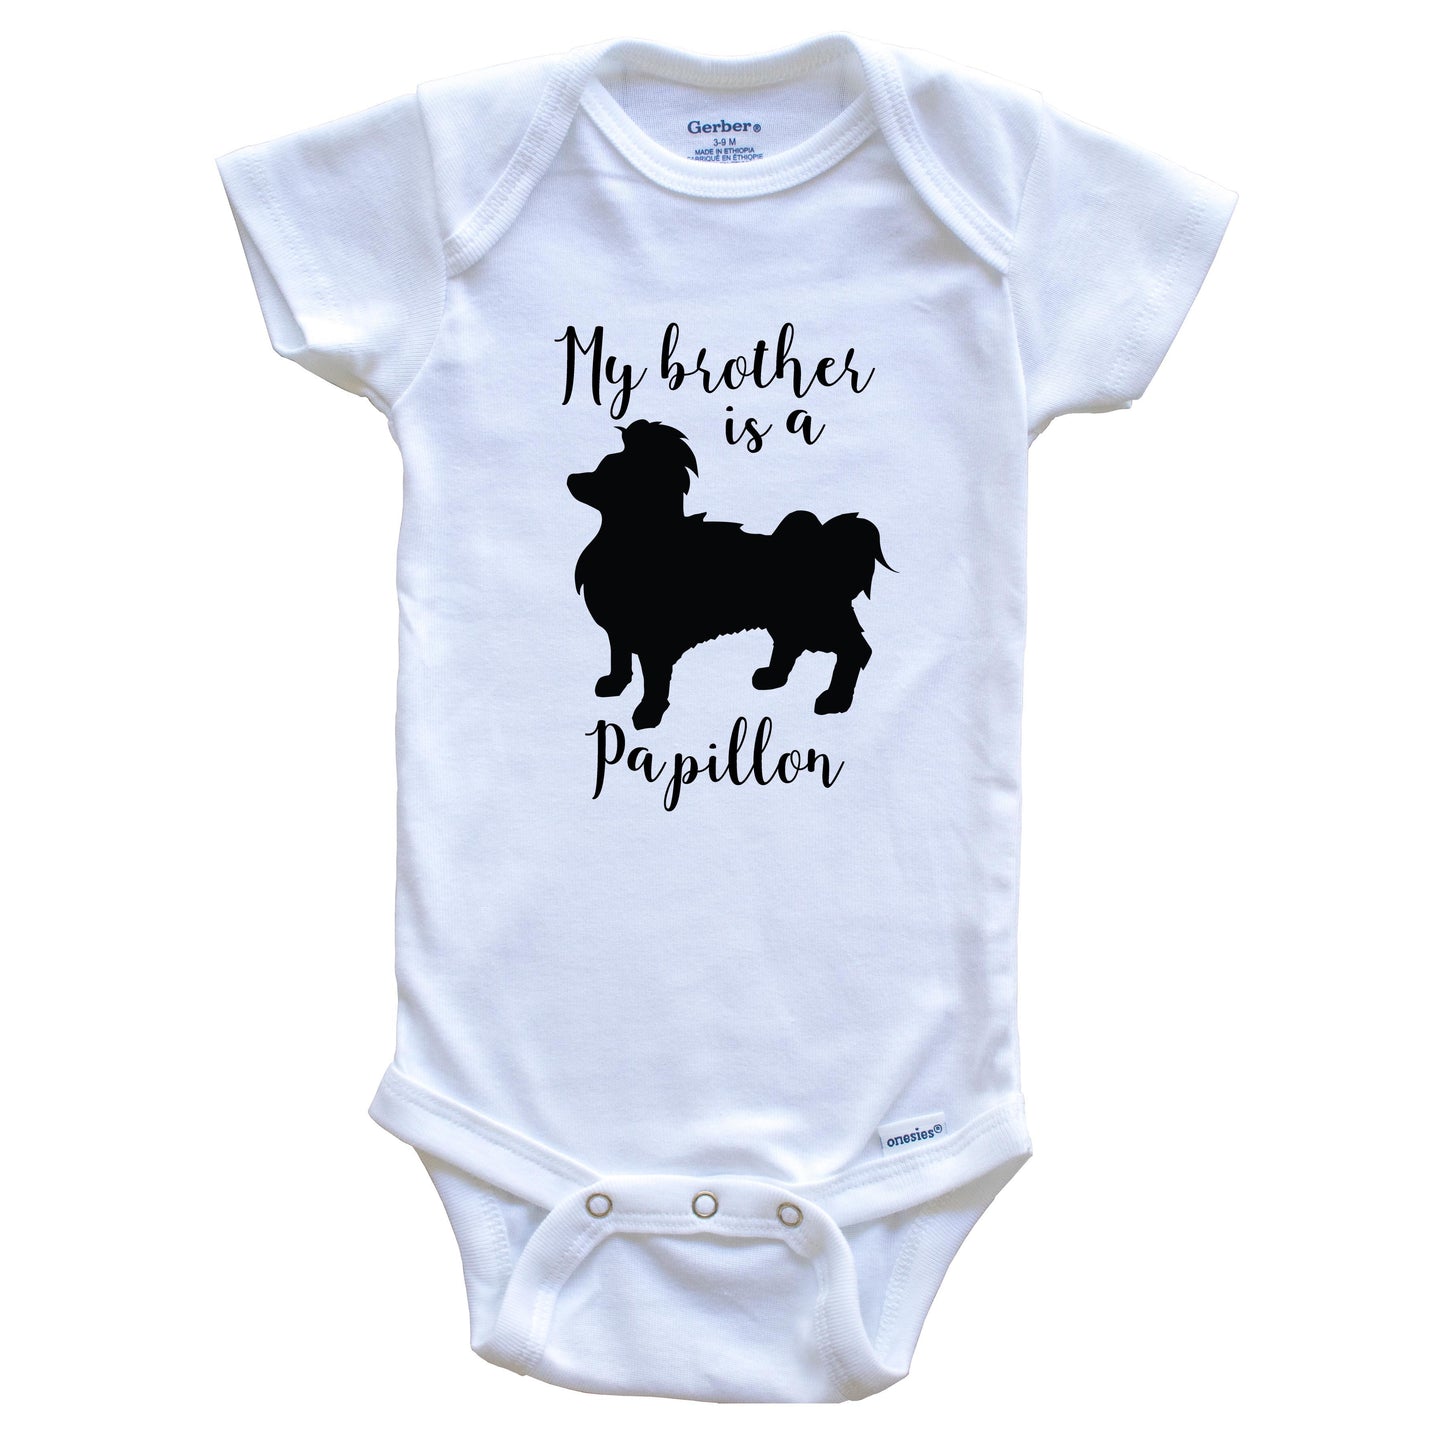 My Brother Is A Papillon Cute Dog Baby Onesie - Papillon One Piece Baby Bodysuit